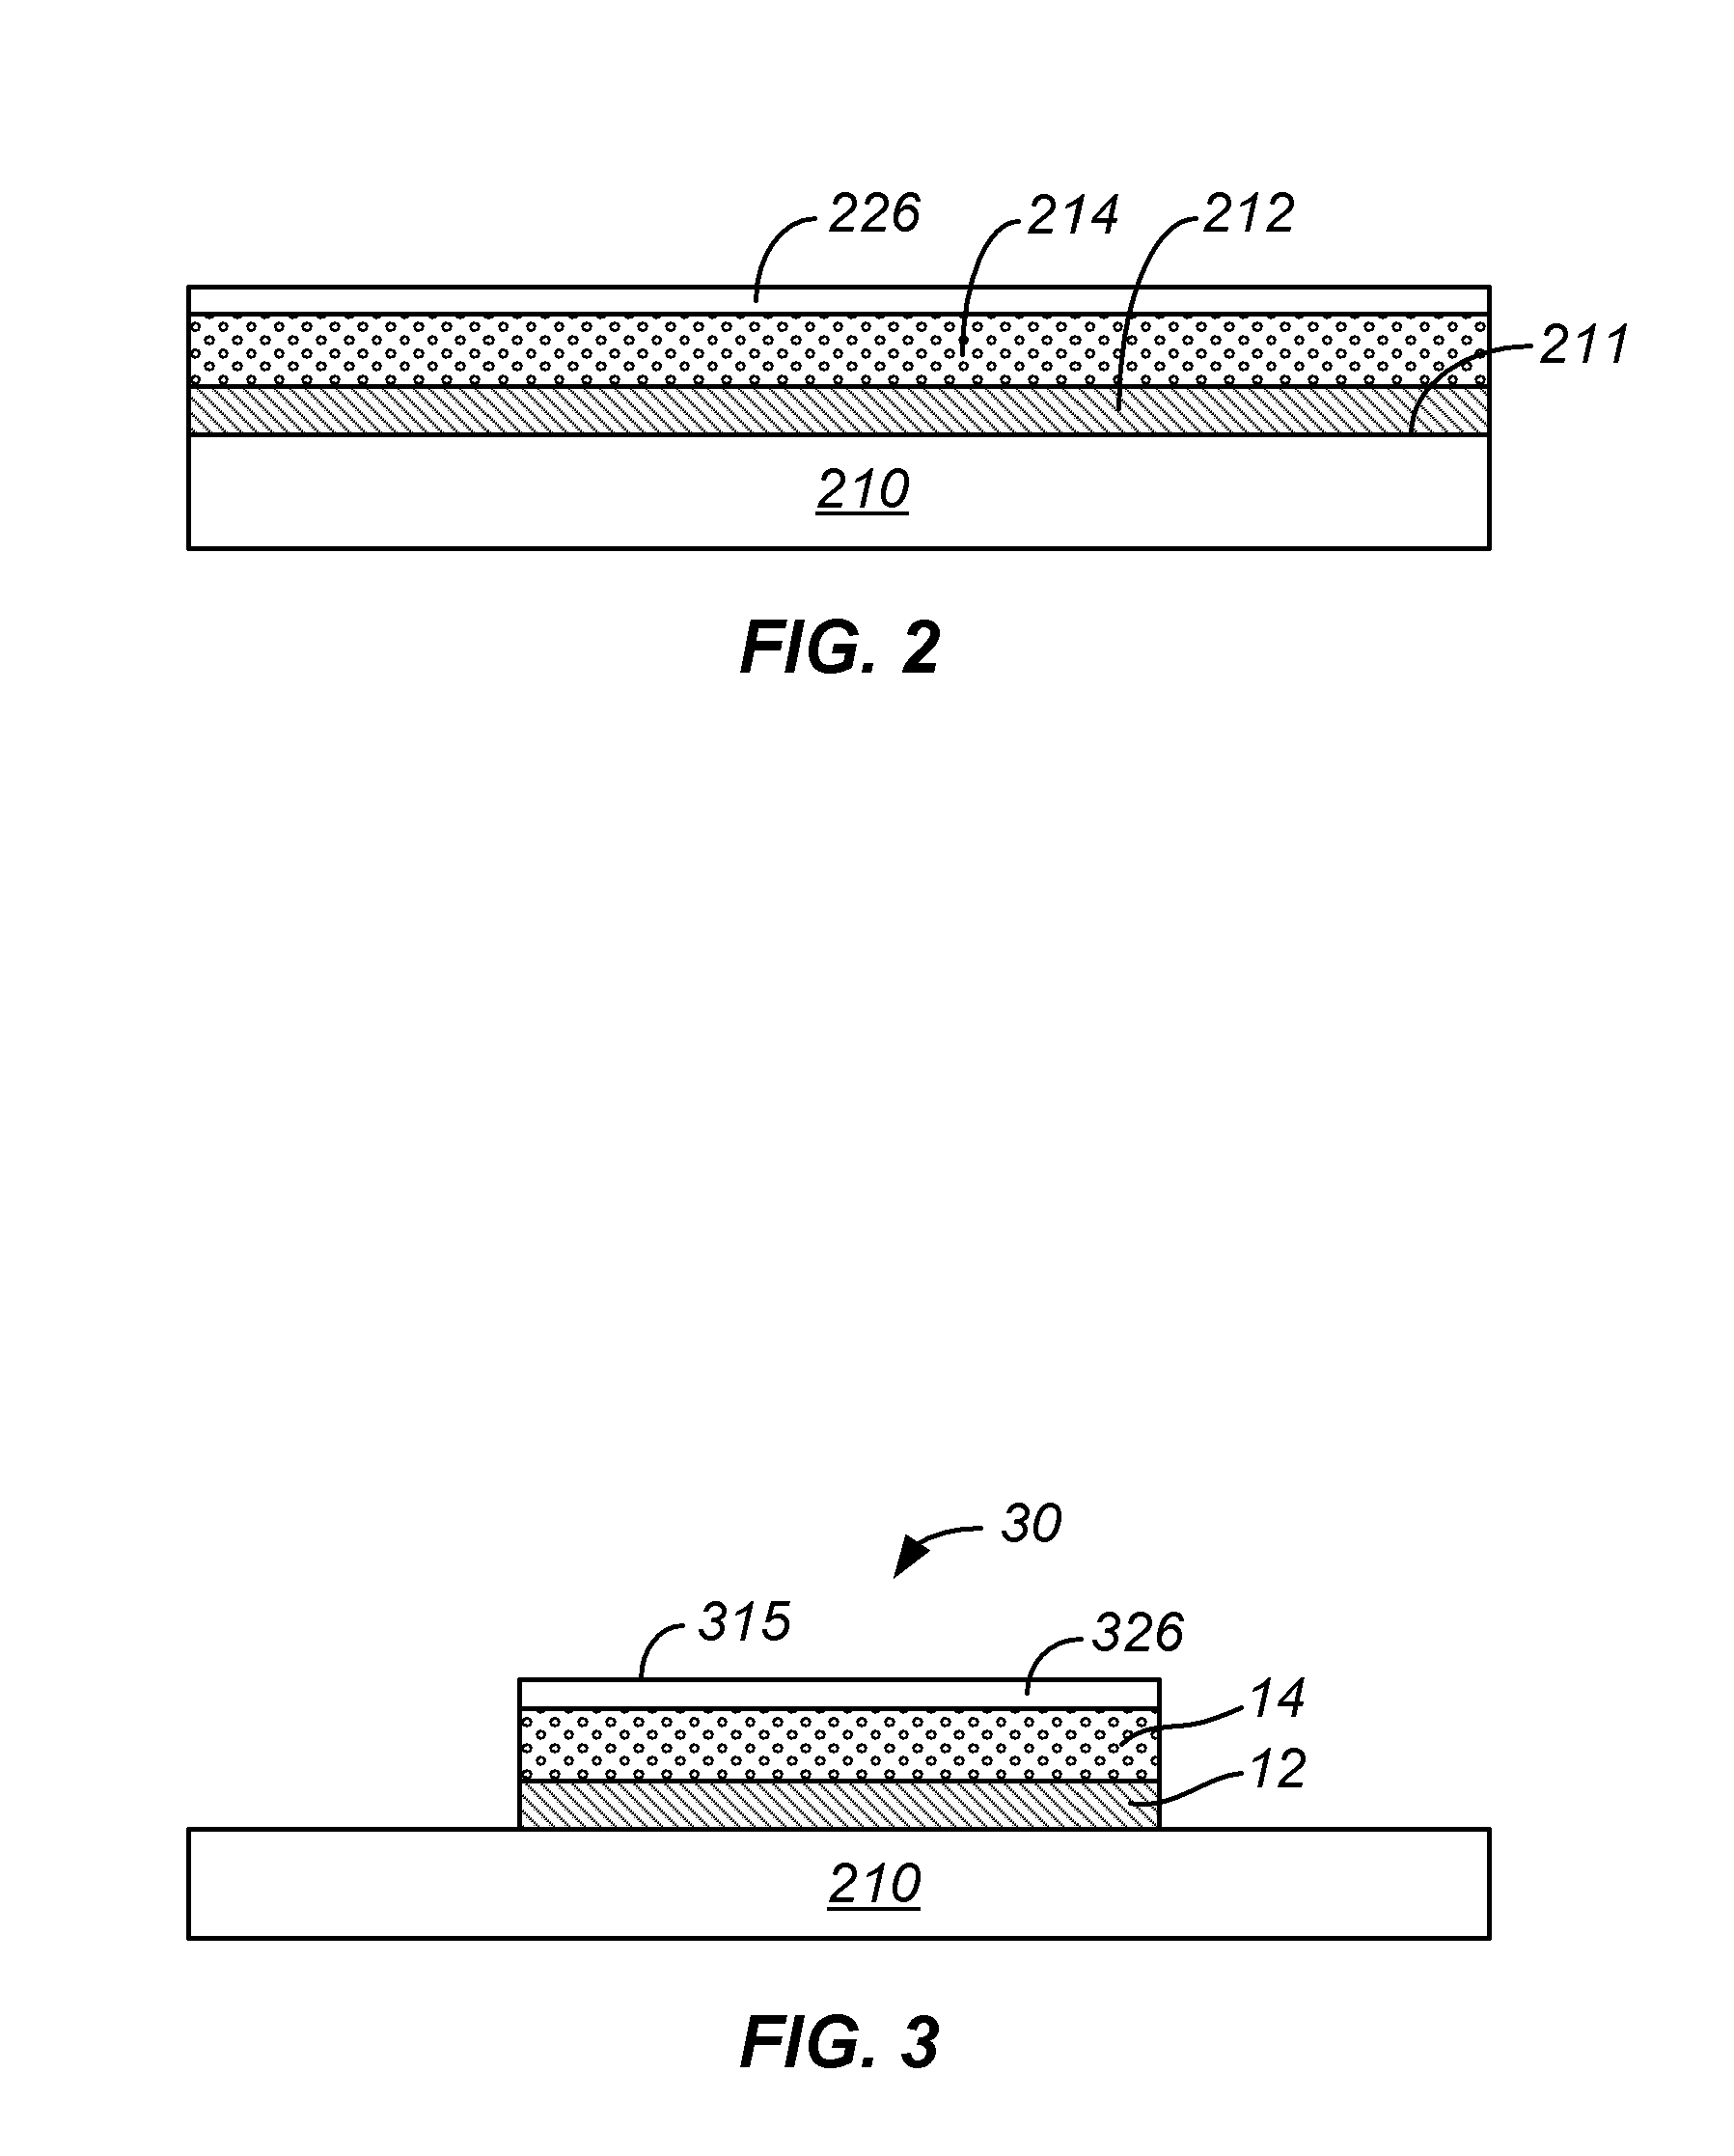 Memory device having wide area phase change element and small electrode contact area